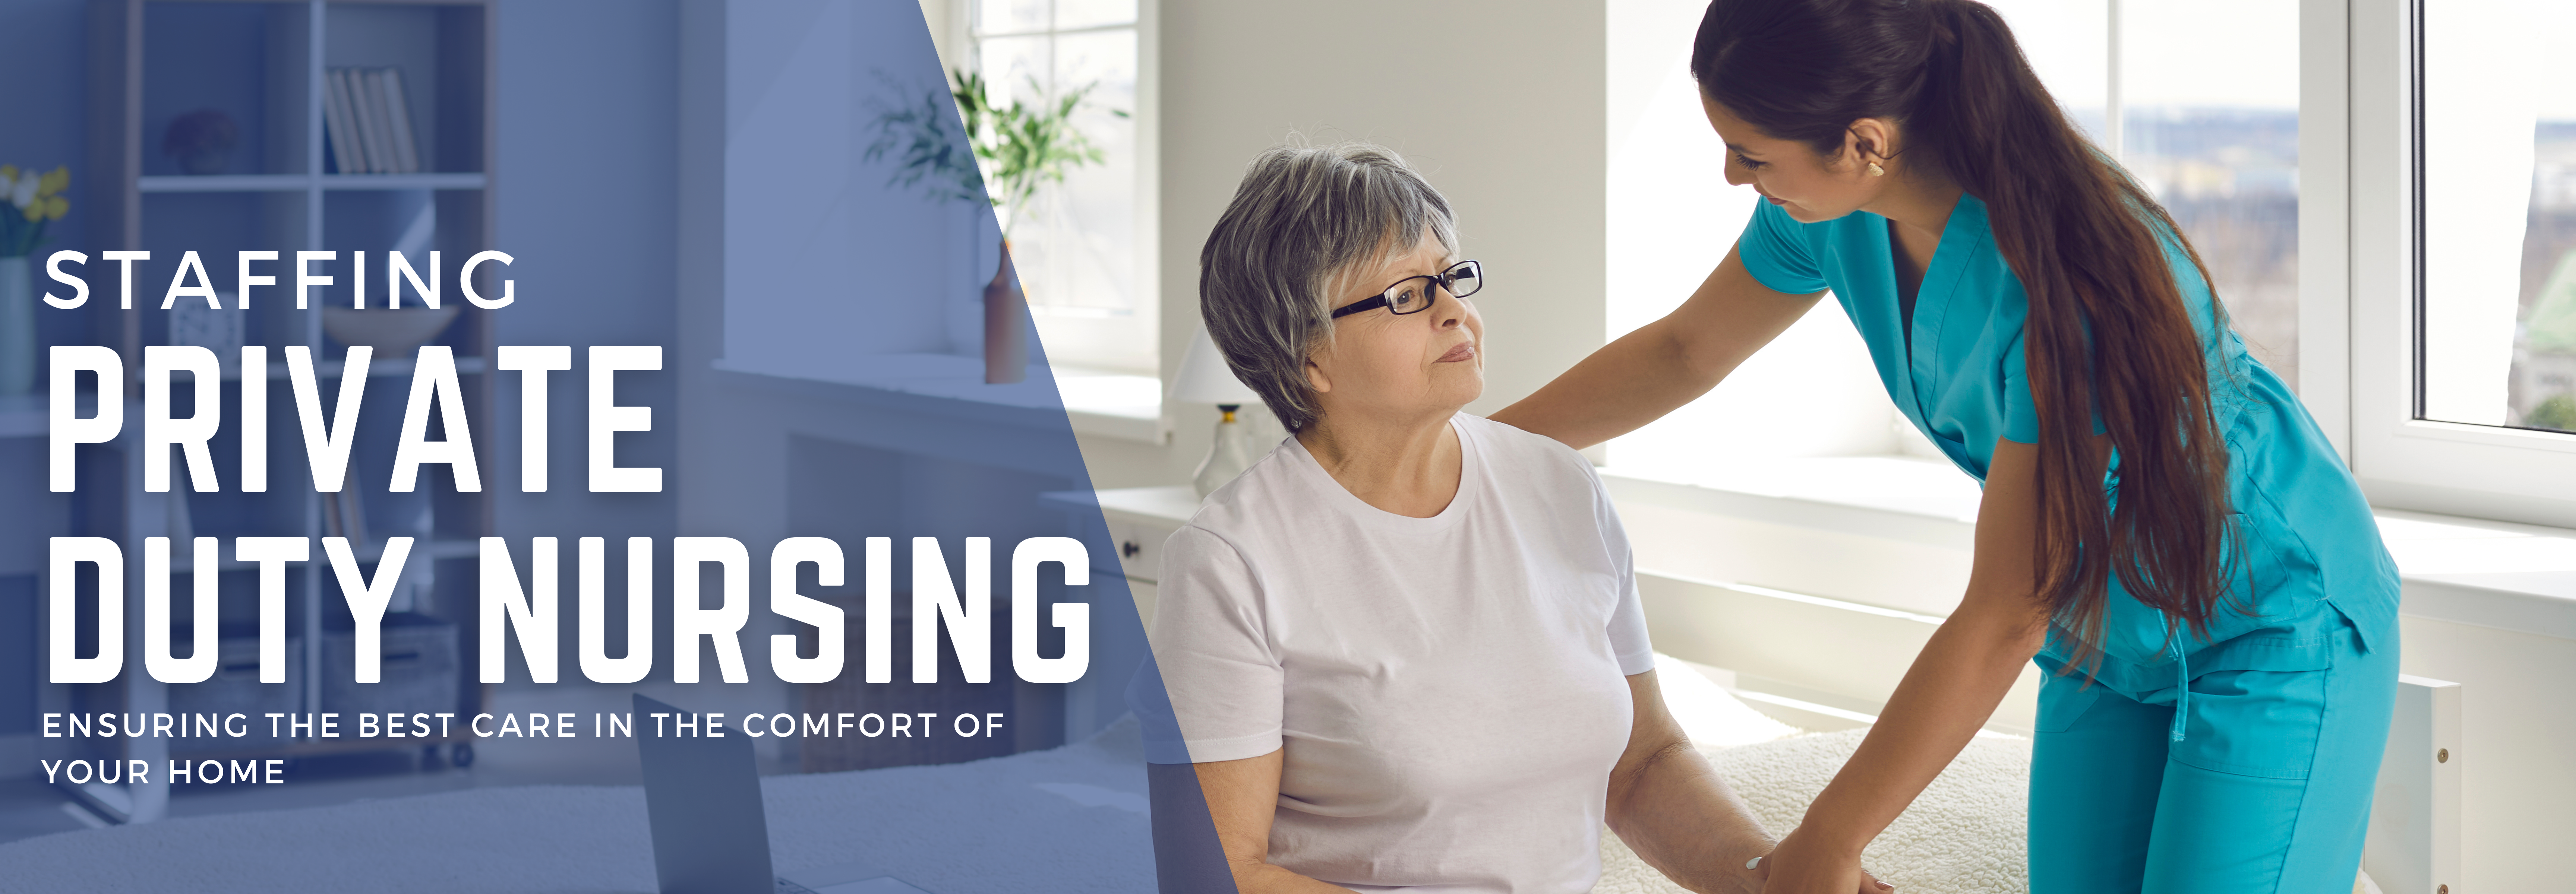 Everything You Need to Know About Private Duty Nursing